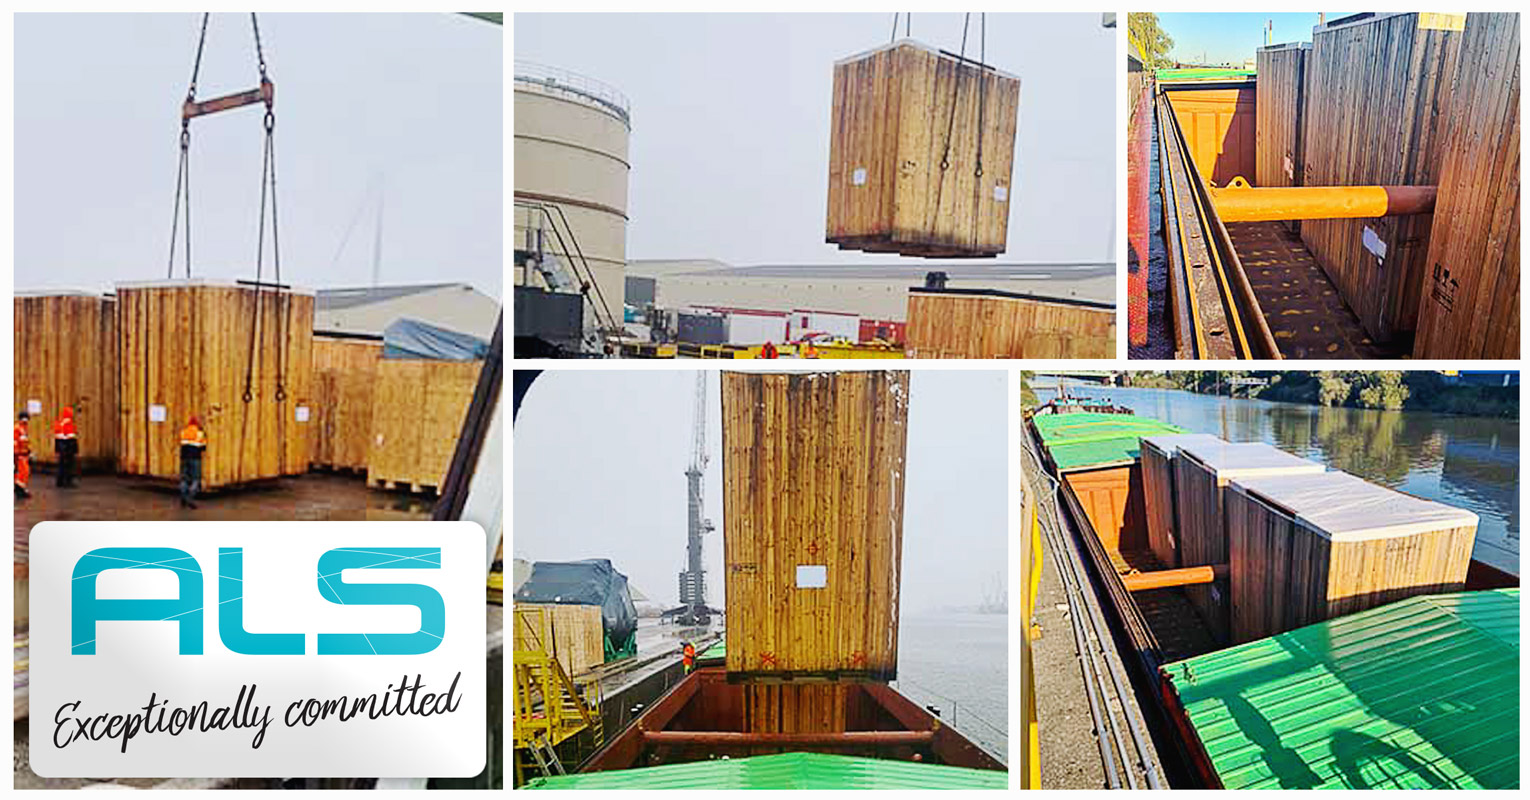 ALS Organised the Transportation of 3 Oversized Wooden Cases by Barge via European Inland Waterways from Germany to Belgium and Onward to Kazakhstan